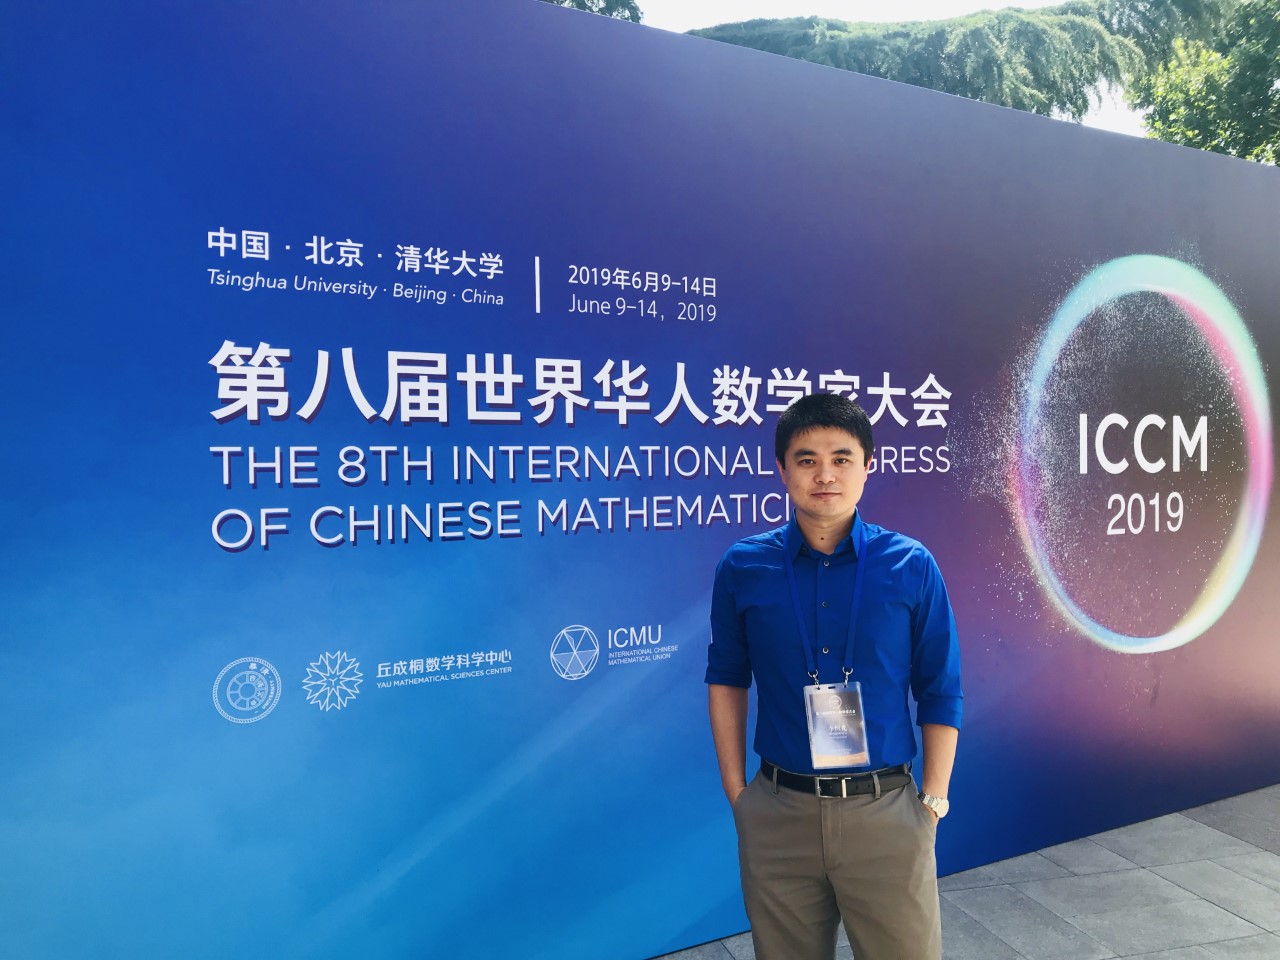 Dr. Li at the 2019 ICCM Conference